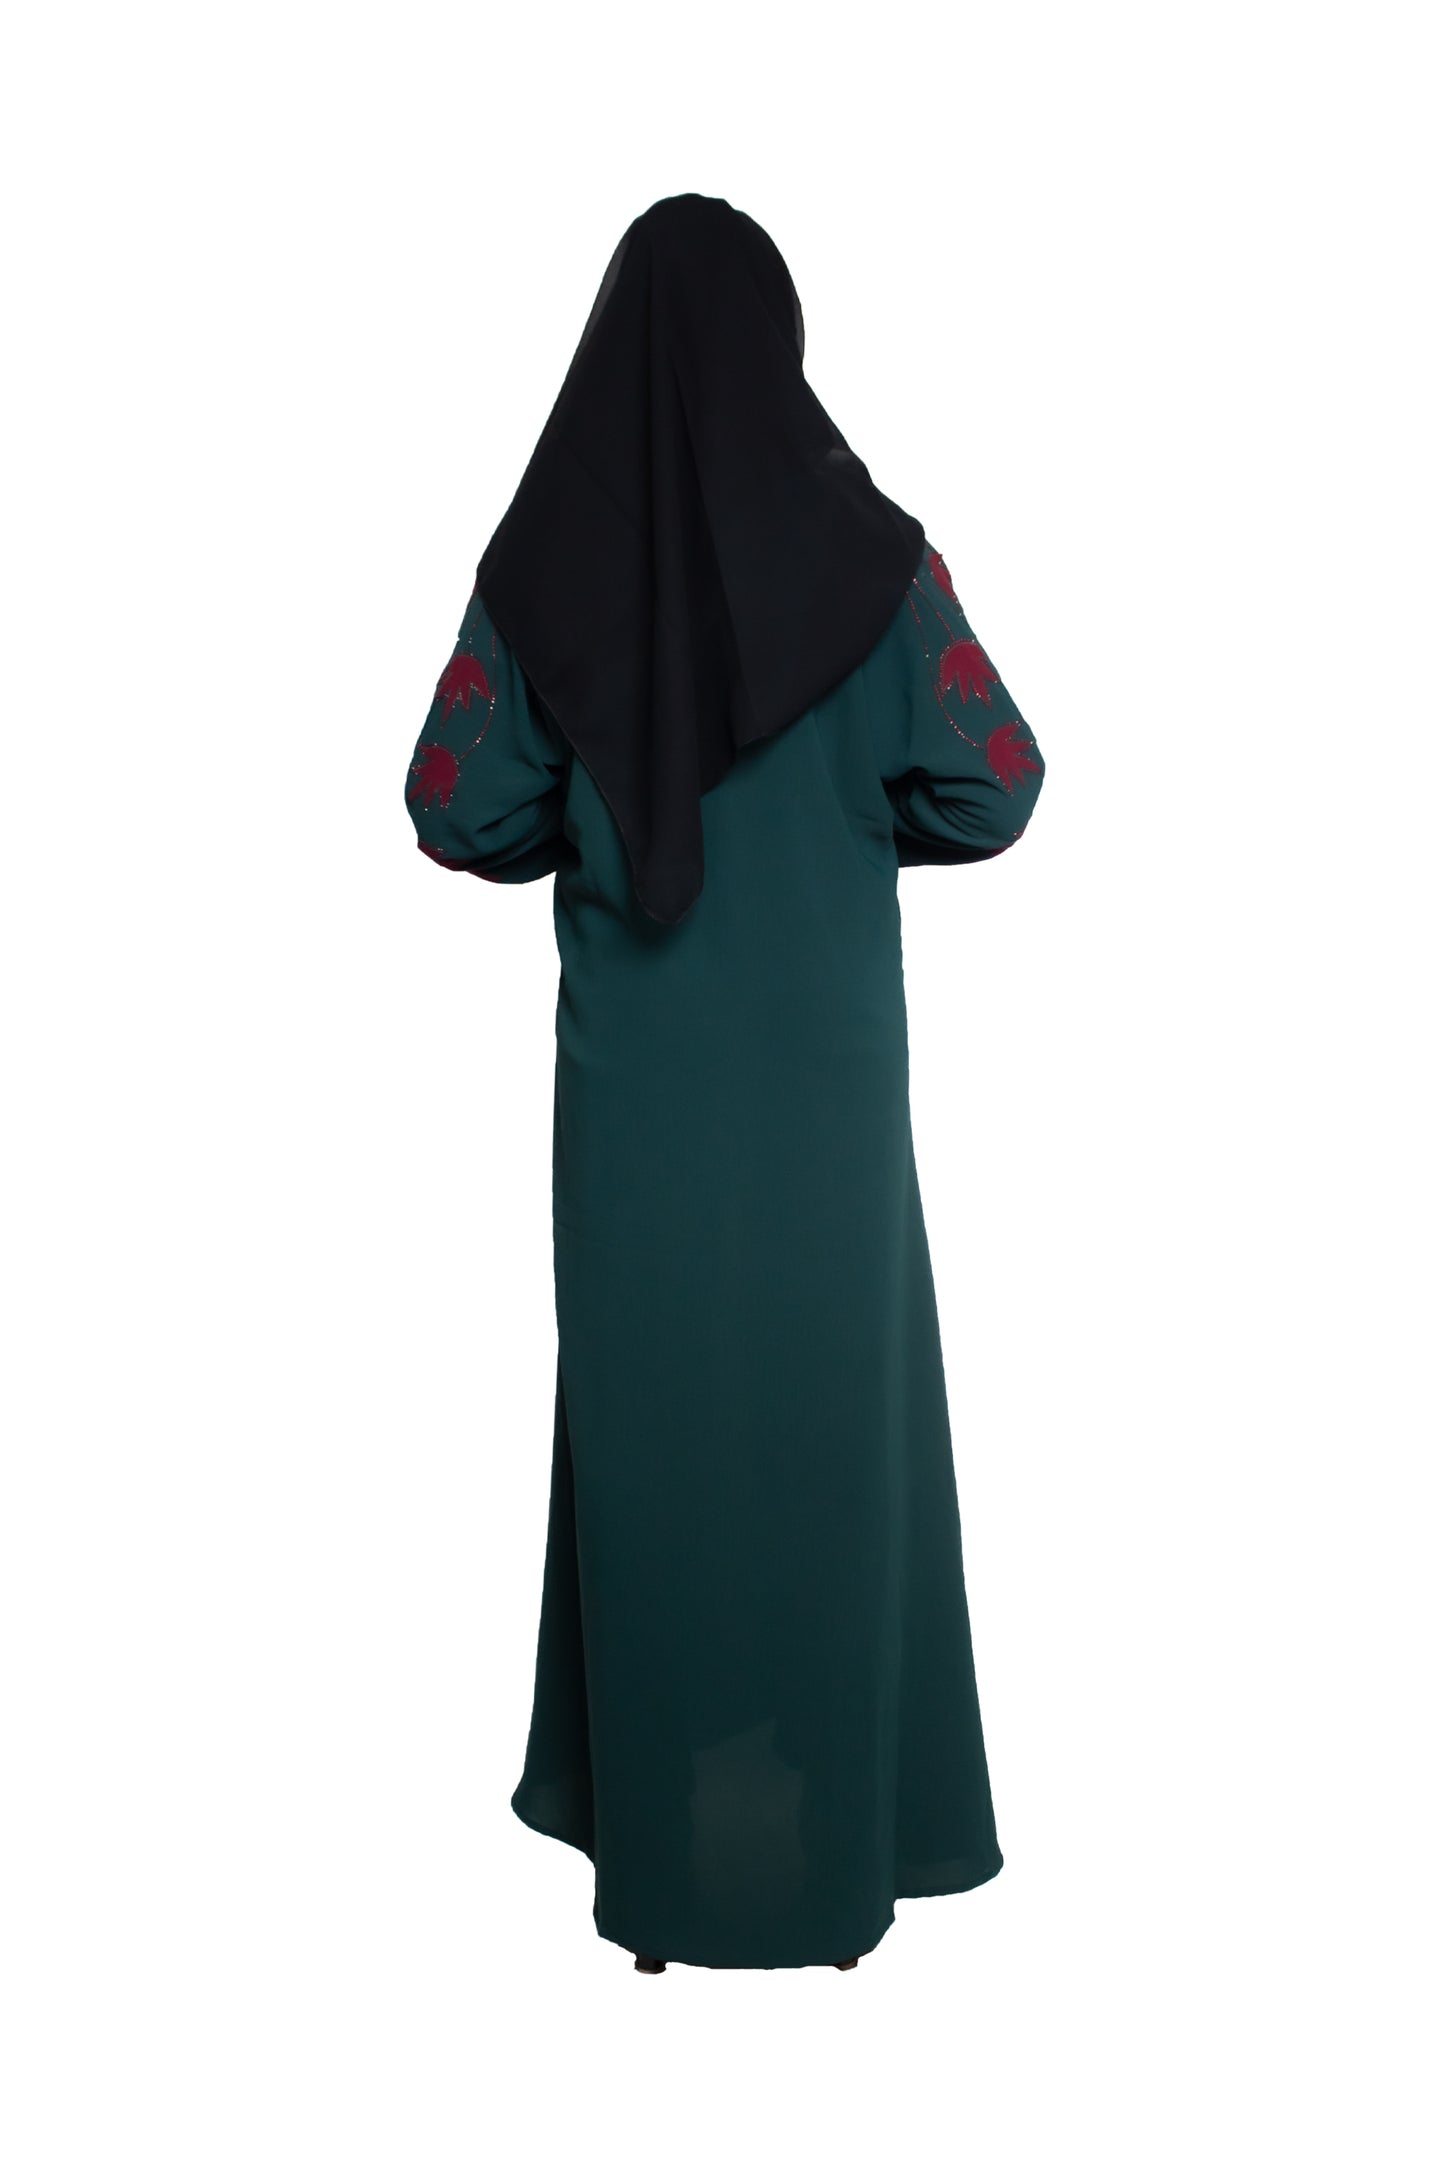 Modest City Selff Design Ramagreen With Red Leaf Abaya or Burqa With Hijab for Women & Girls-Series Laiba